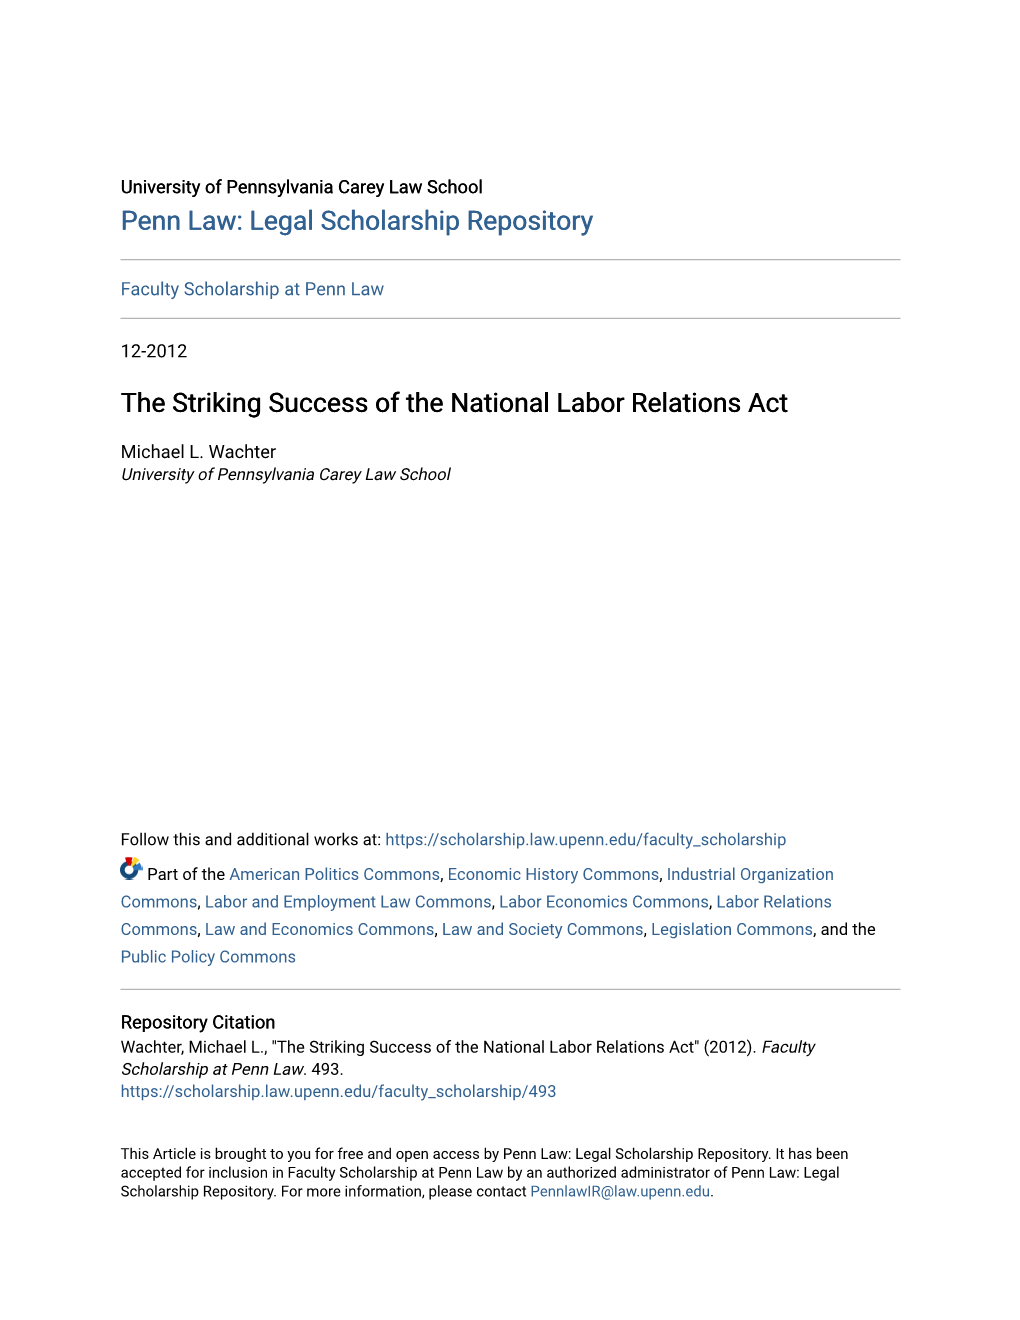 The Striking Success of the National Labor Relations Act